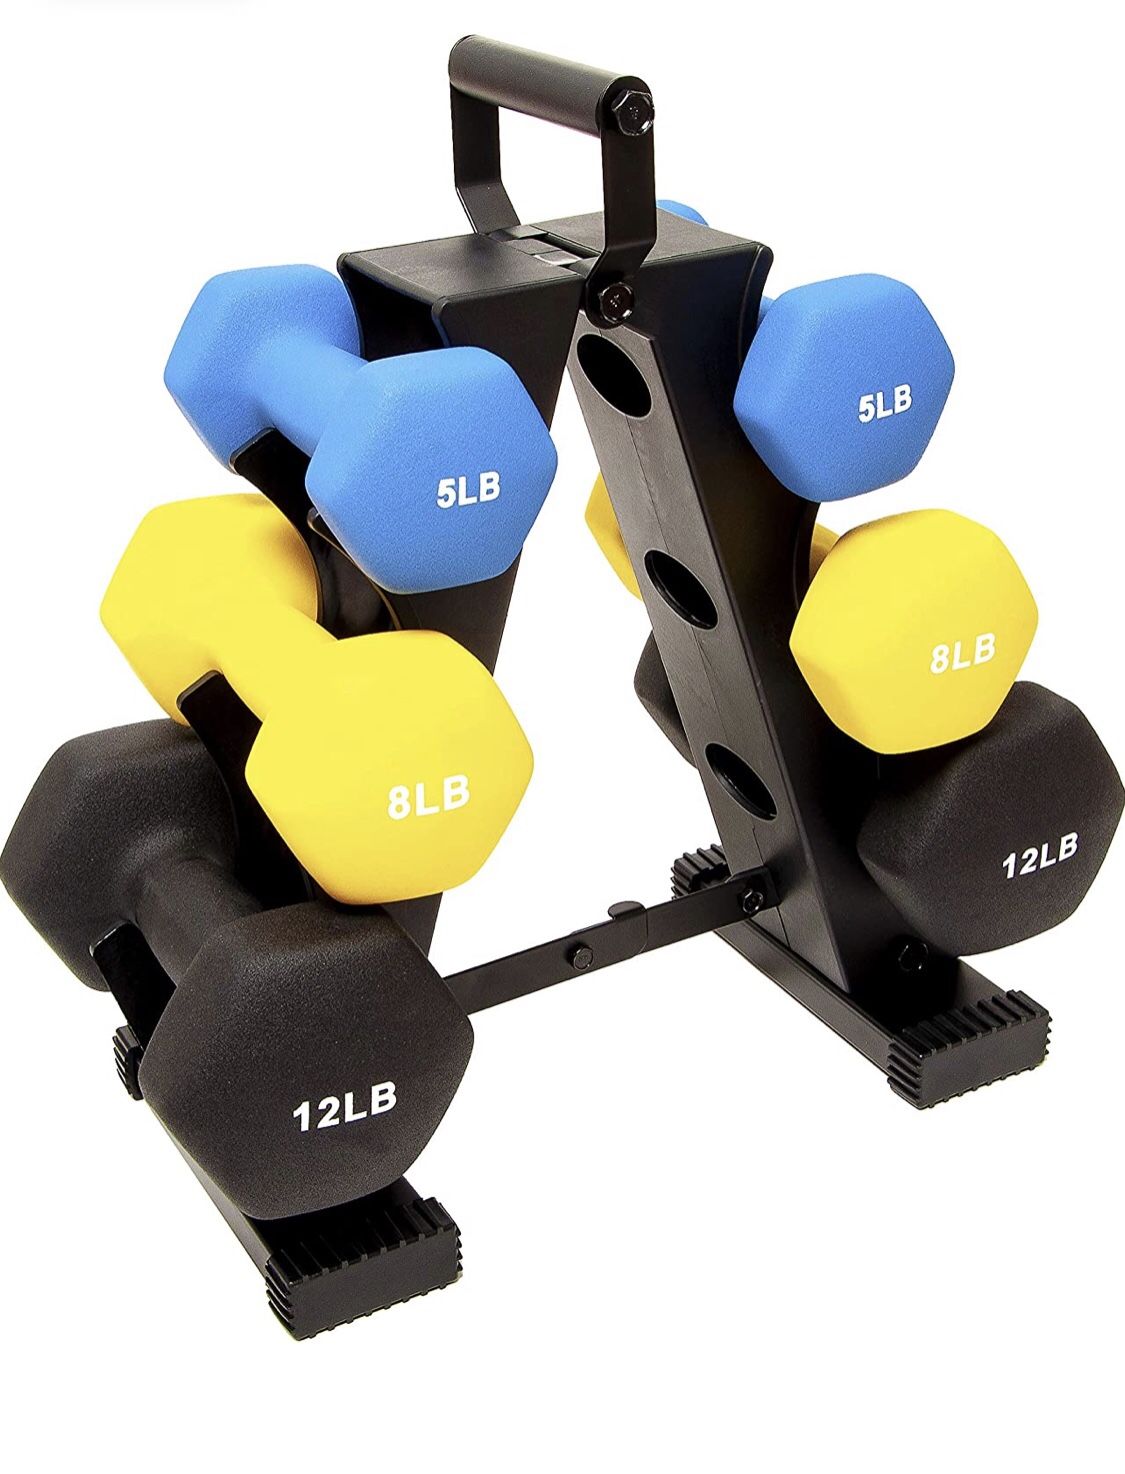 All-Purpose Dumbbells in Pair, or Set with Rack